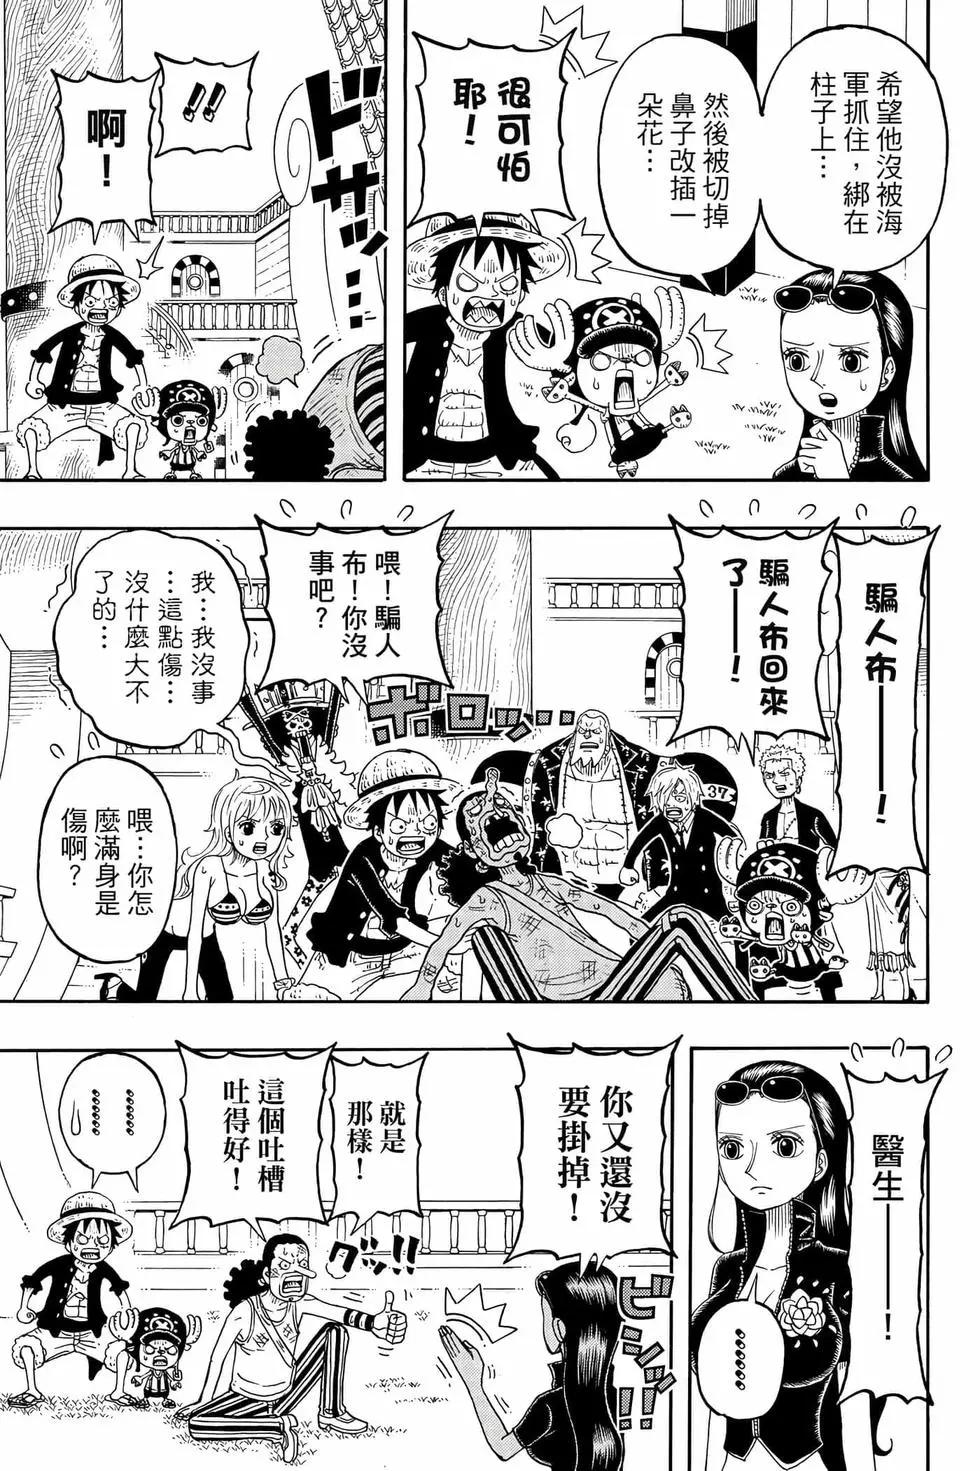 One piece party - 第04卷(1/4) - 6